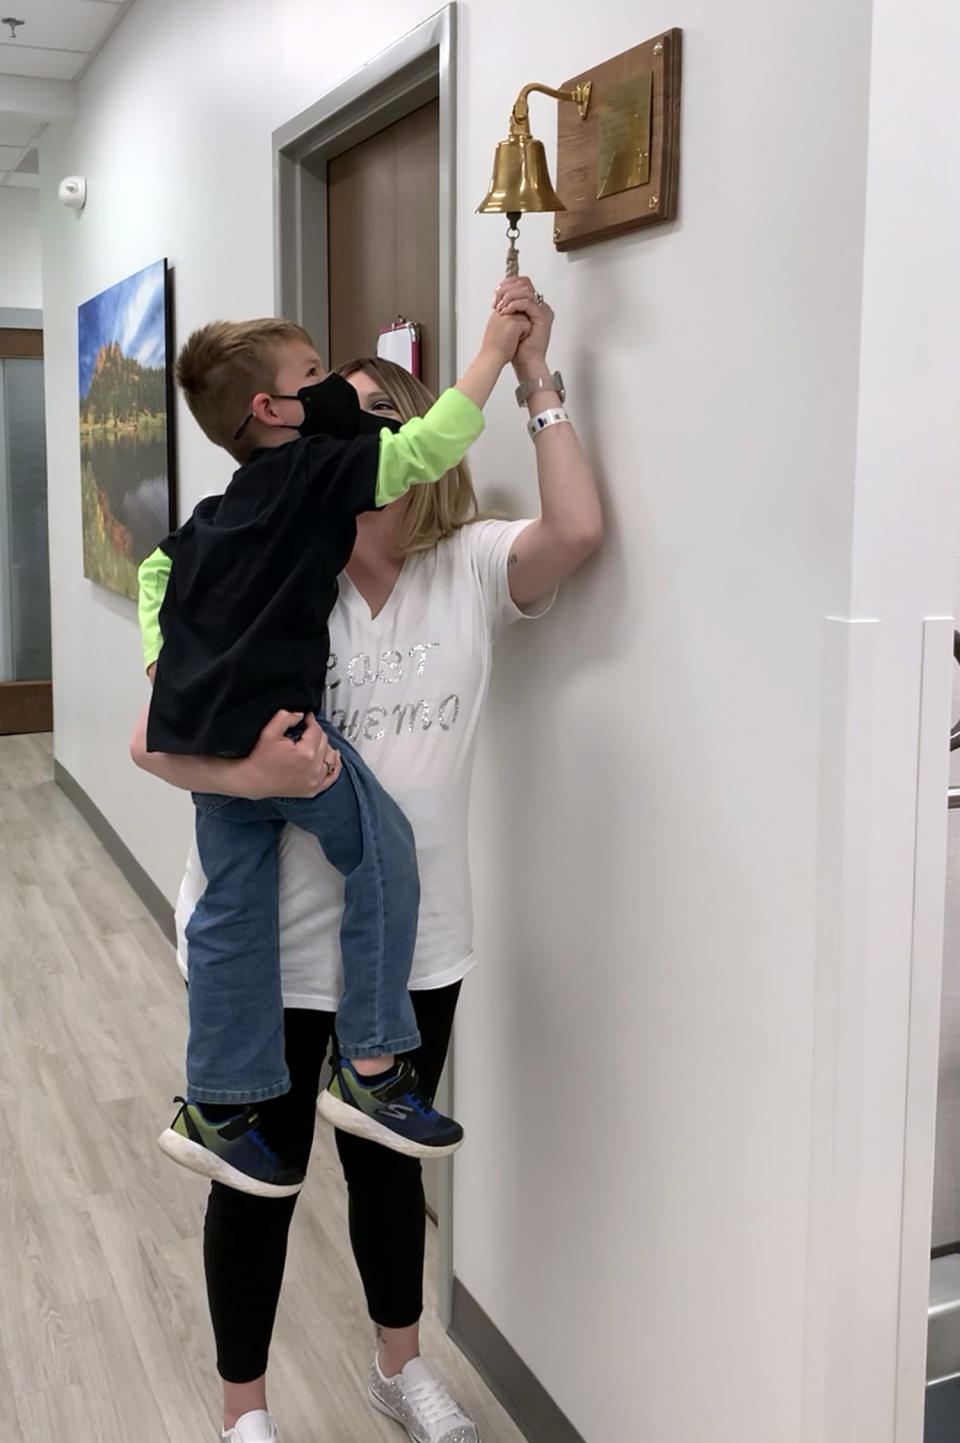 While Jenna Beyersdorf's son couldn't join her for support at treatments, he could ring the chemo bell with her. She worried about him being 